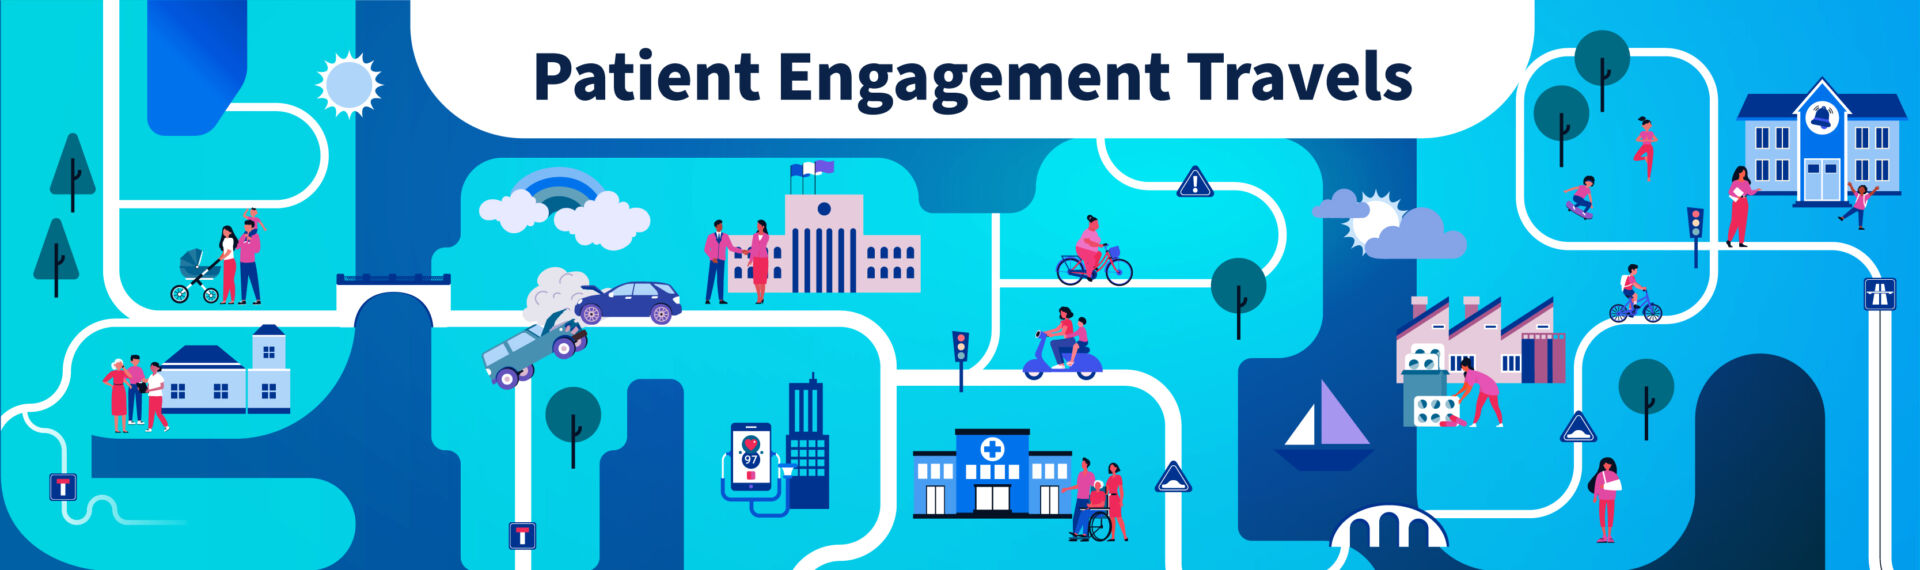 Patient Engagement Travels: join us to explore this exciting, changing landscape